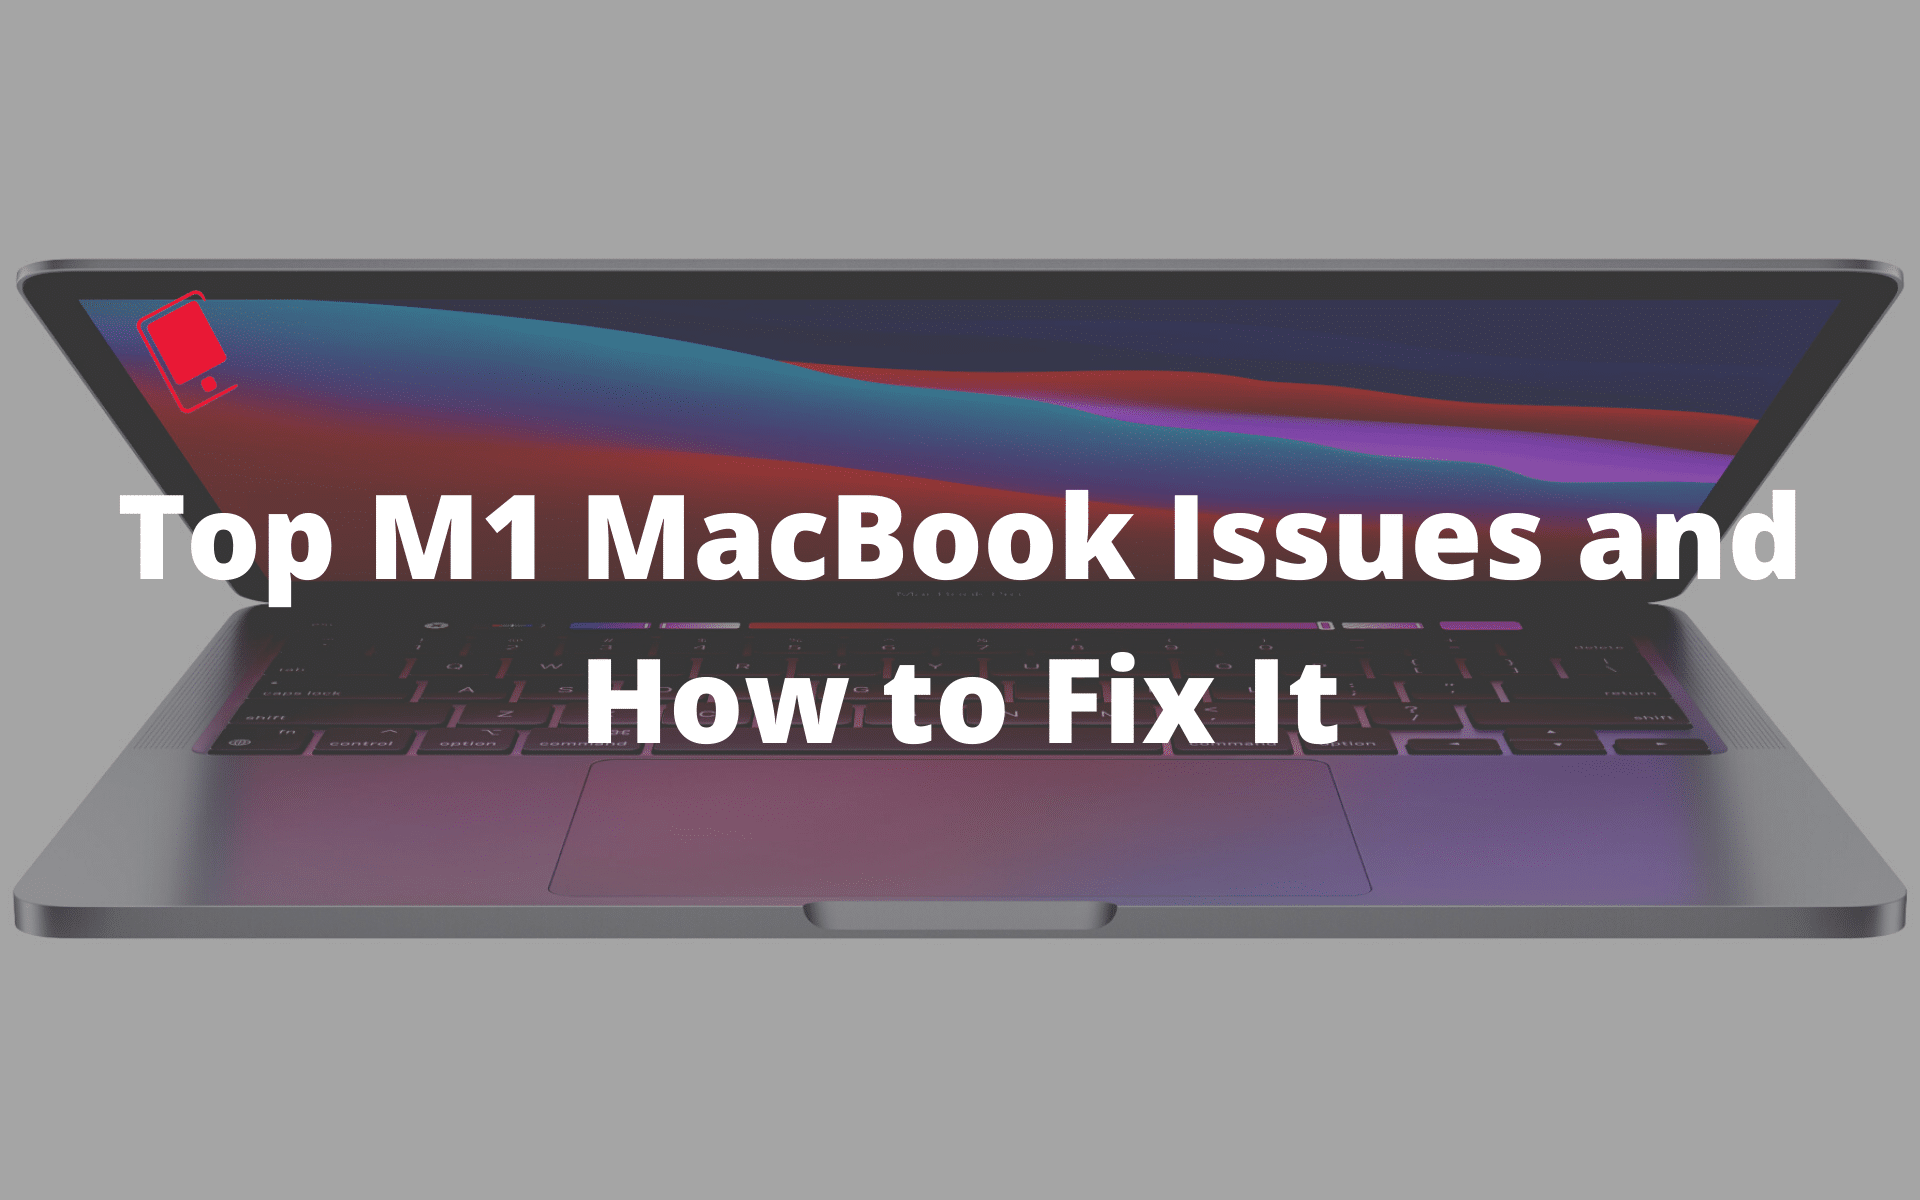 MacBook M1 Issues and how to fix them